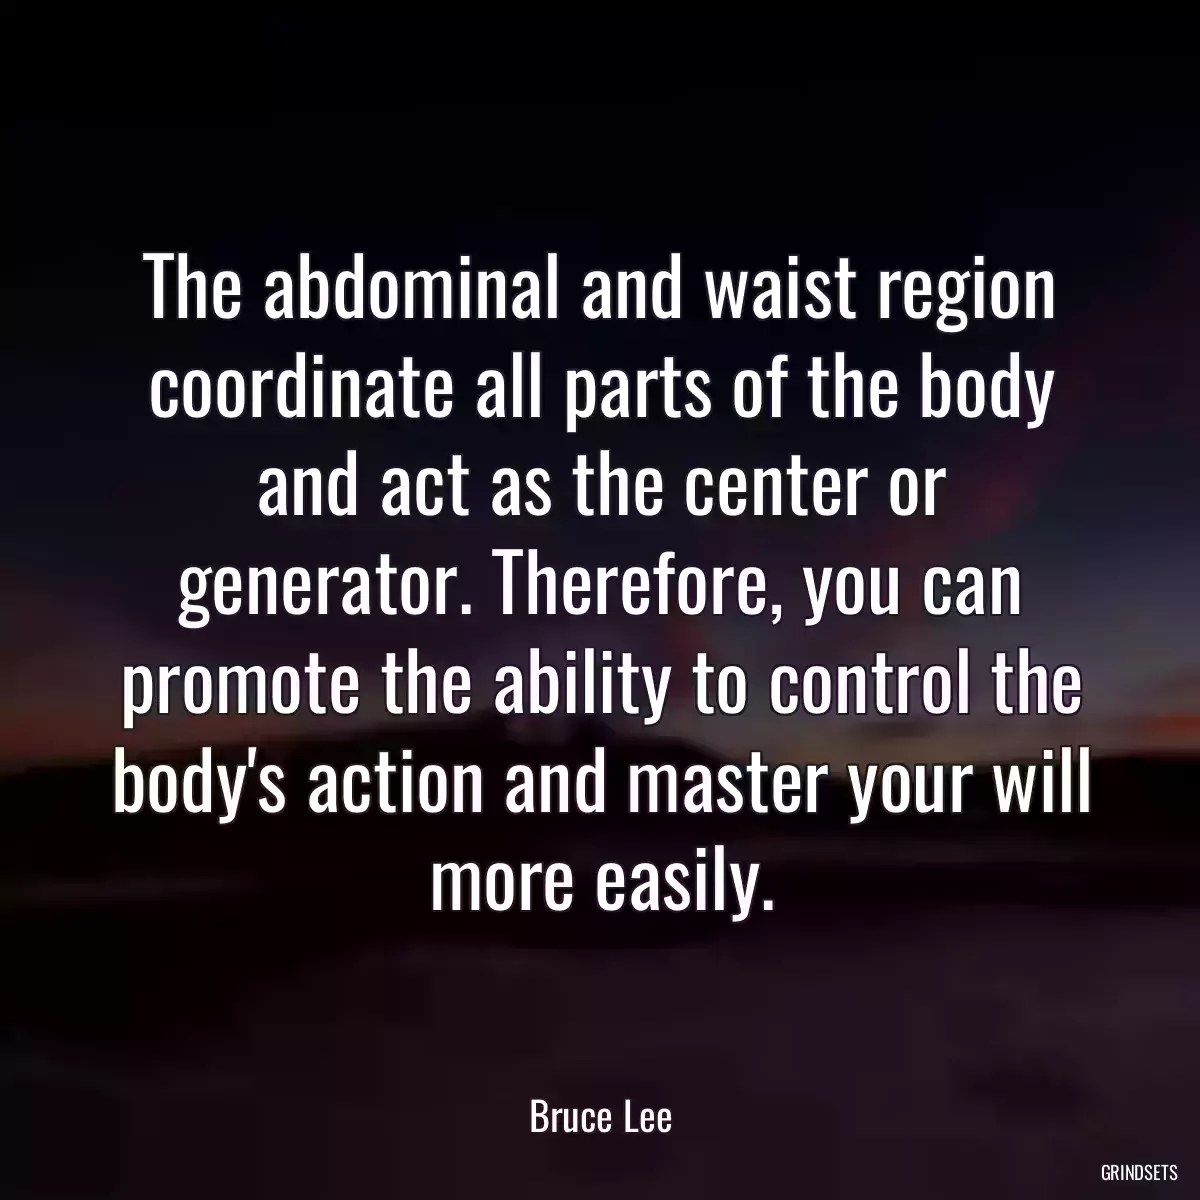 The abdominal and waist region coordinate all parts of the body and act as the center or generator. Therefore, you can promote the ability to control the body\'s action and master your will more easily.